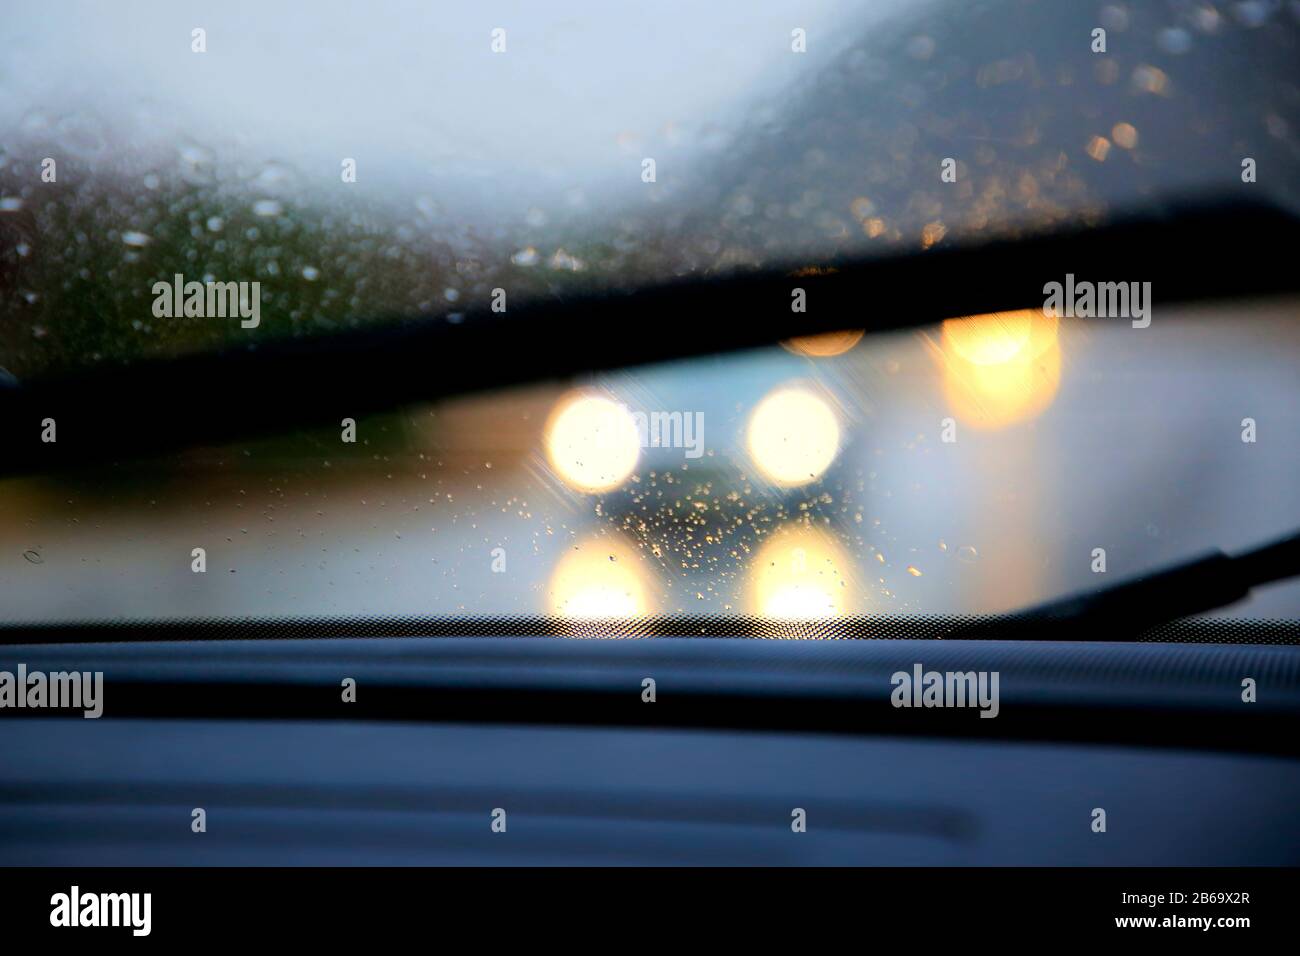 Driving on highway in heavy rain,  windshield wipers on, low visibility with dazzling headlights of oncoming traffic. Stock Photo